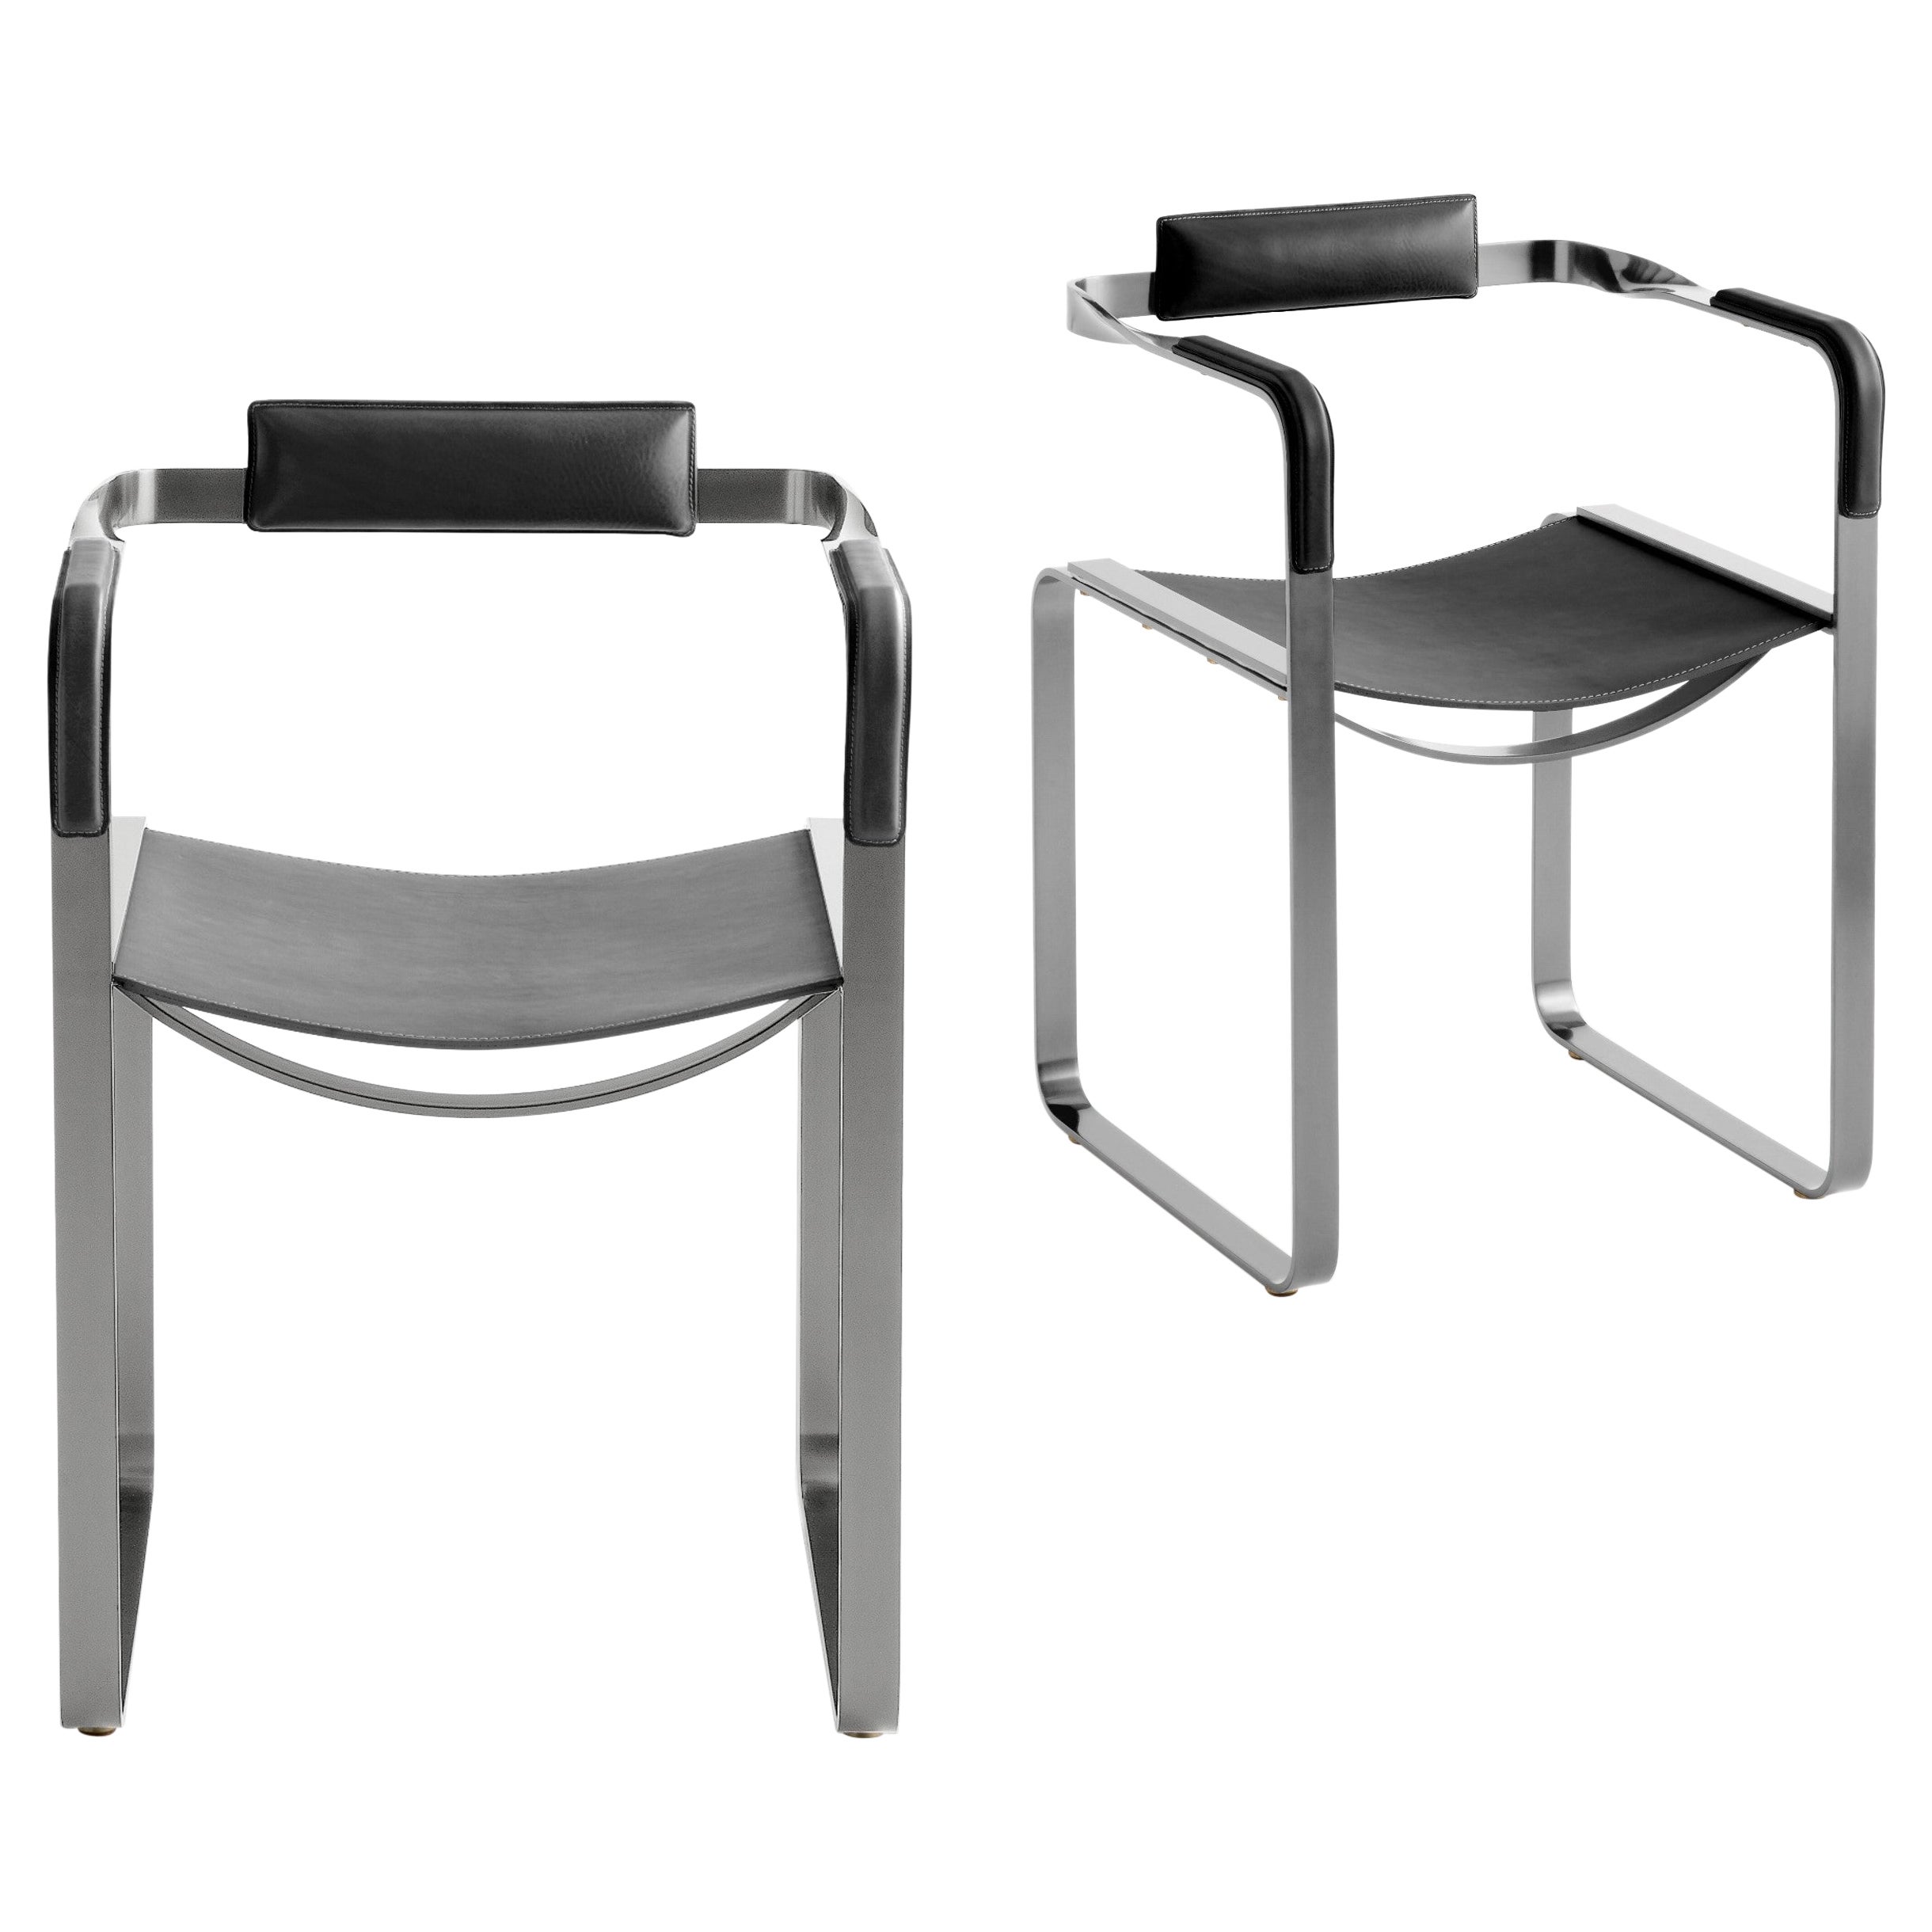 Set of 2, Armchair, Old Silver Steel & Black Saddle Leather, Contemporary Style For Sale